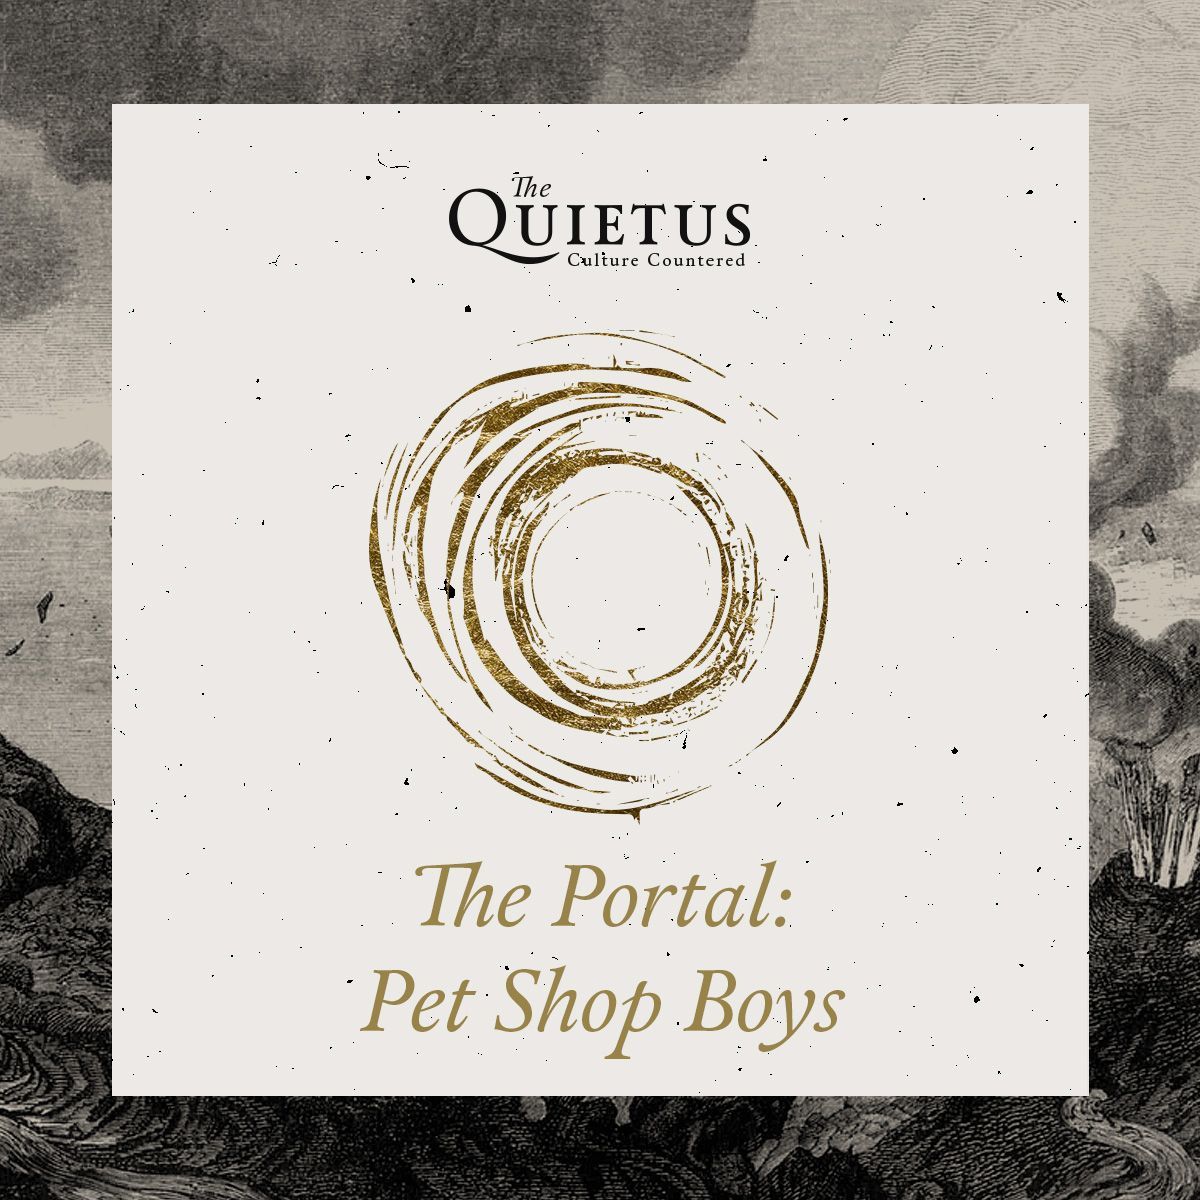 'As part of our #PetShopBoysWeek, we have regenerated #ThePortal to give a dive into The Quietus' archive of writing on Messrs. Tennant & Lowe' buff.ly/3WIKufQ @petshopboys